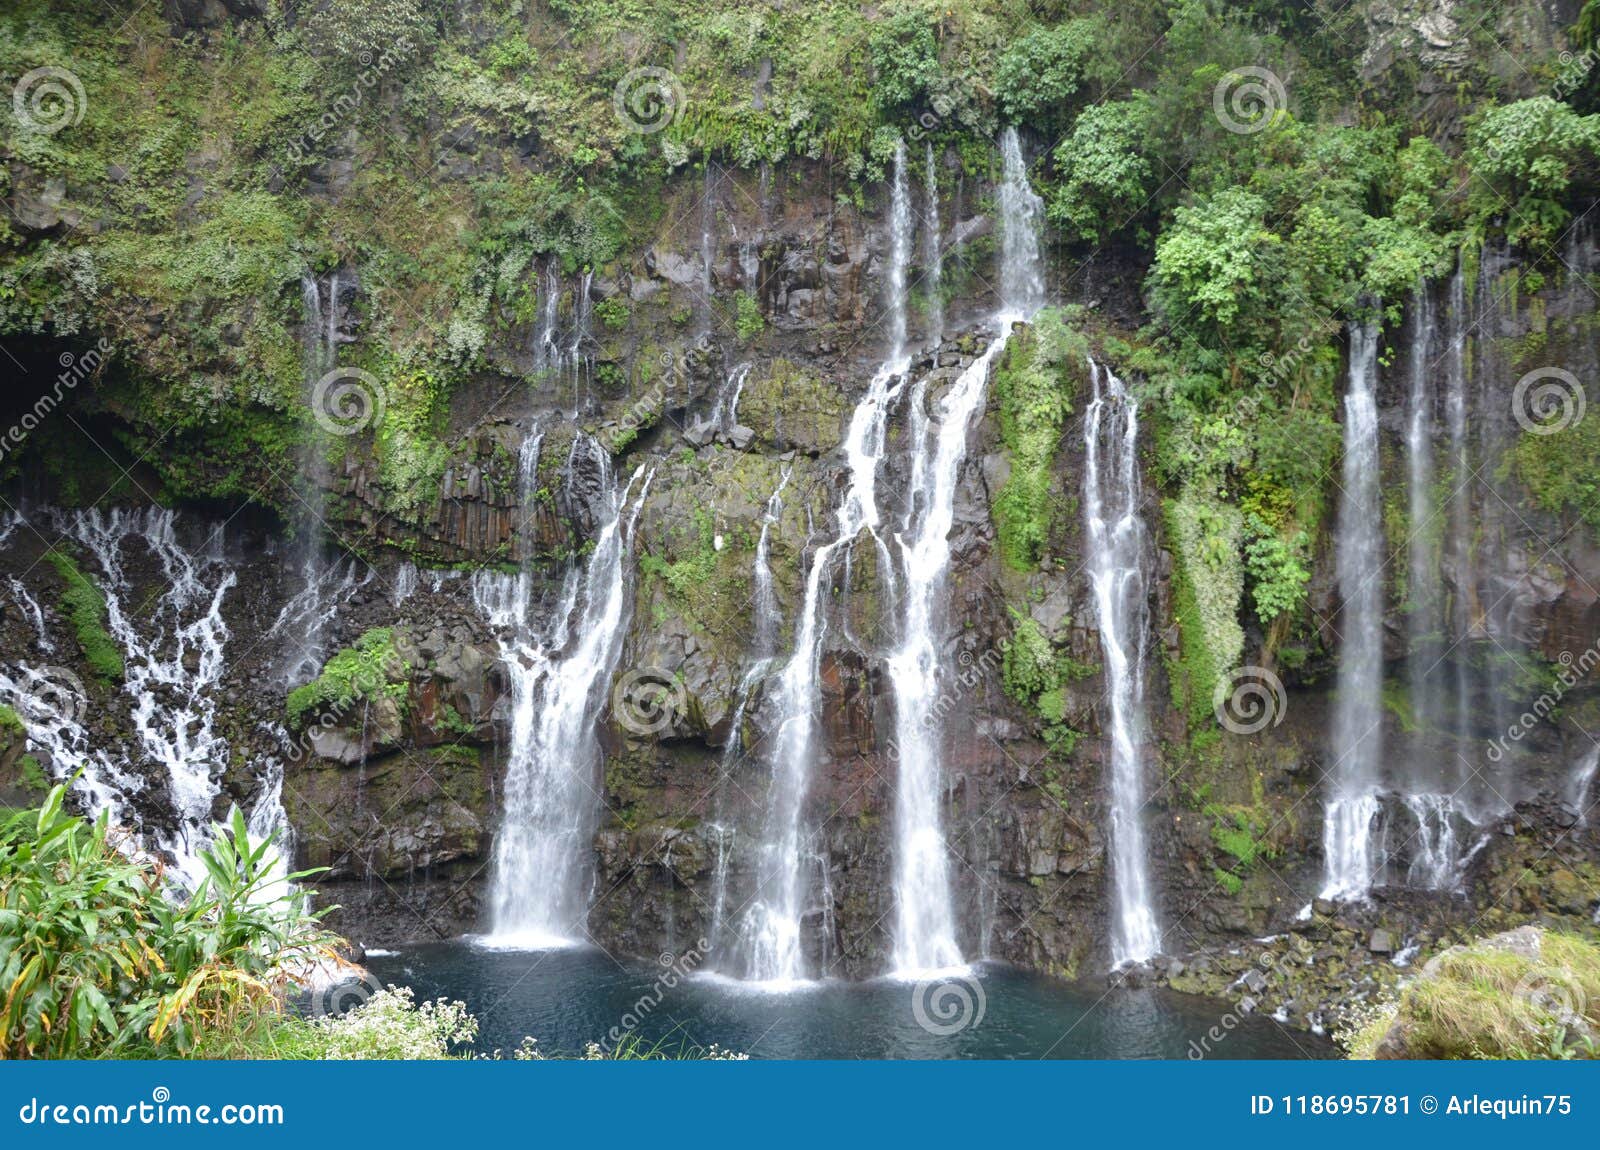 grand galet falls in the island of reunion